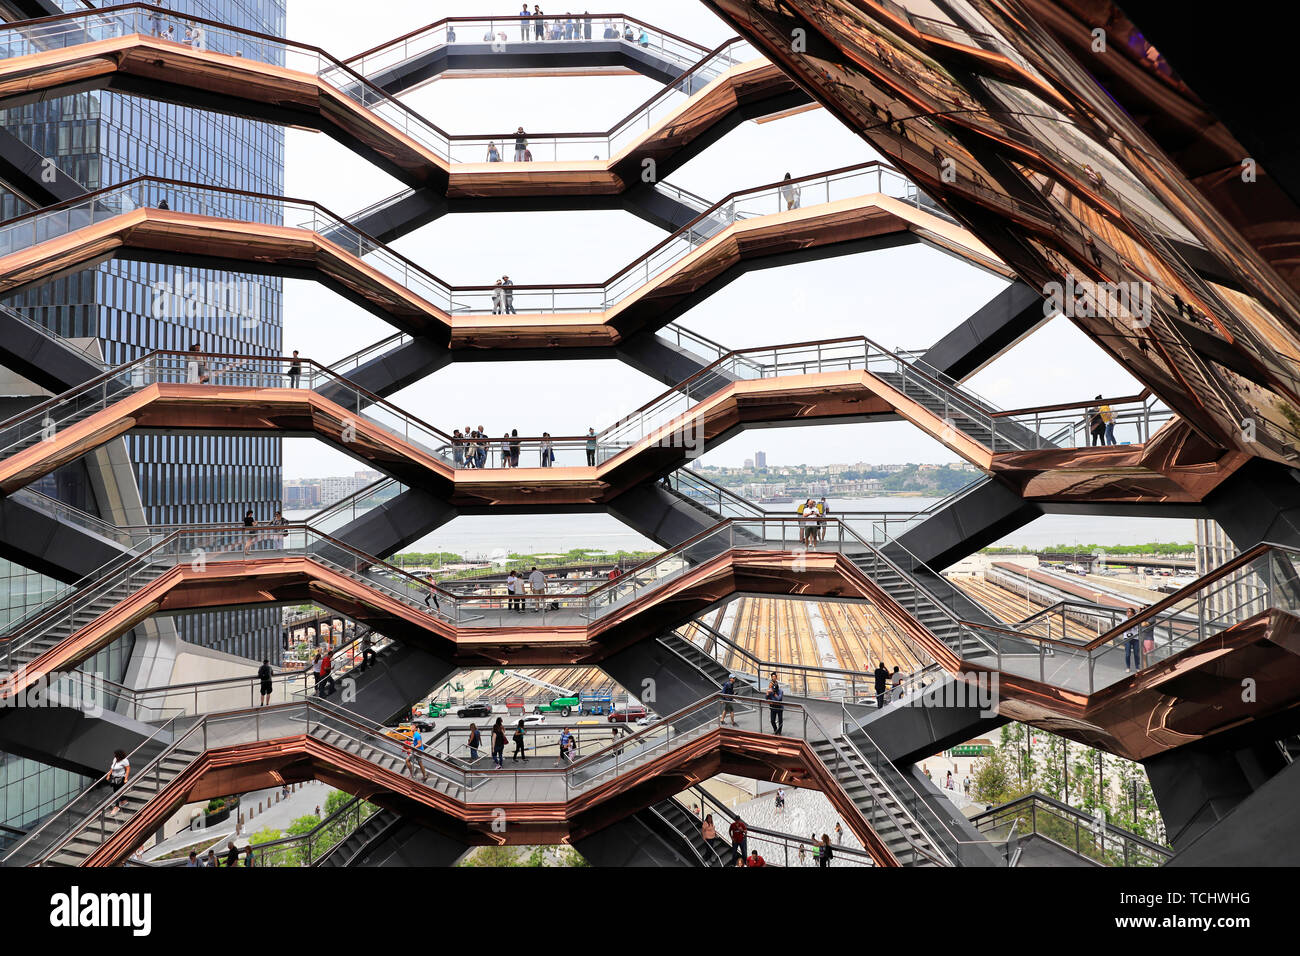 The Vessel In Hudson Yards In West Side Of Manhattan New York City New York Usa Stock Photo Alamy